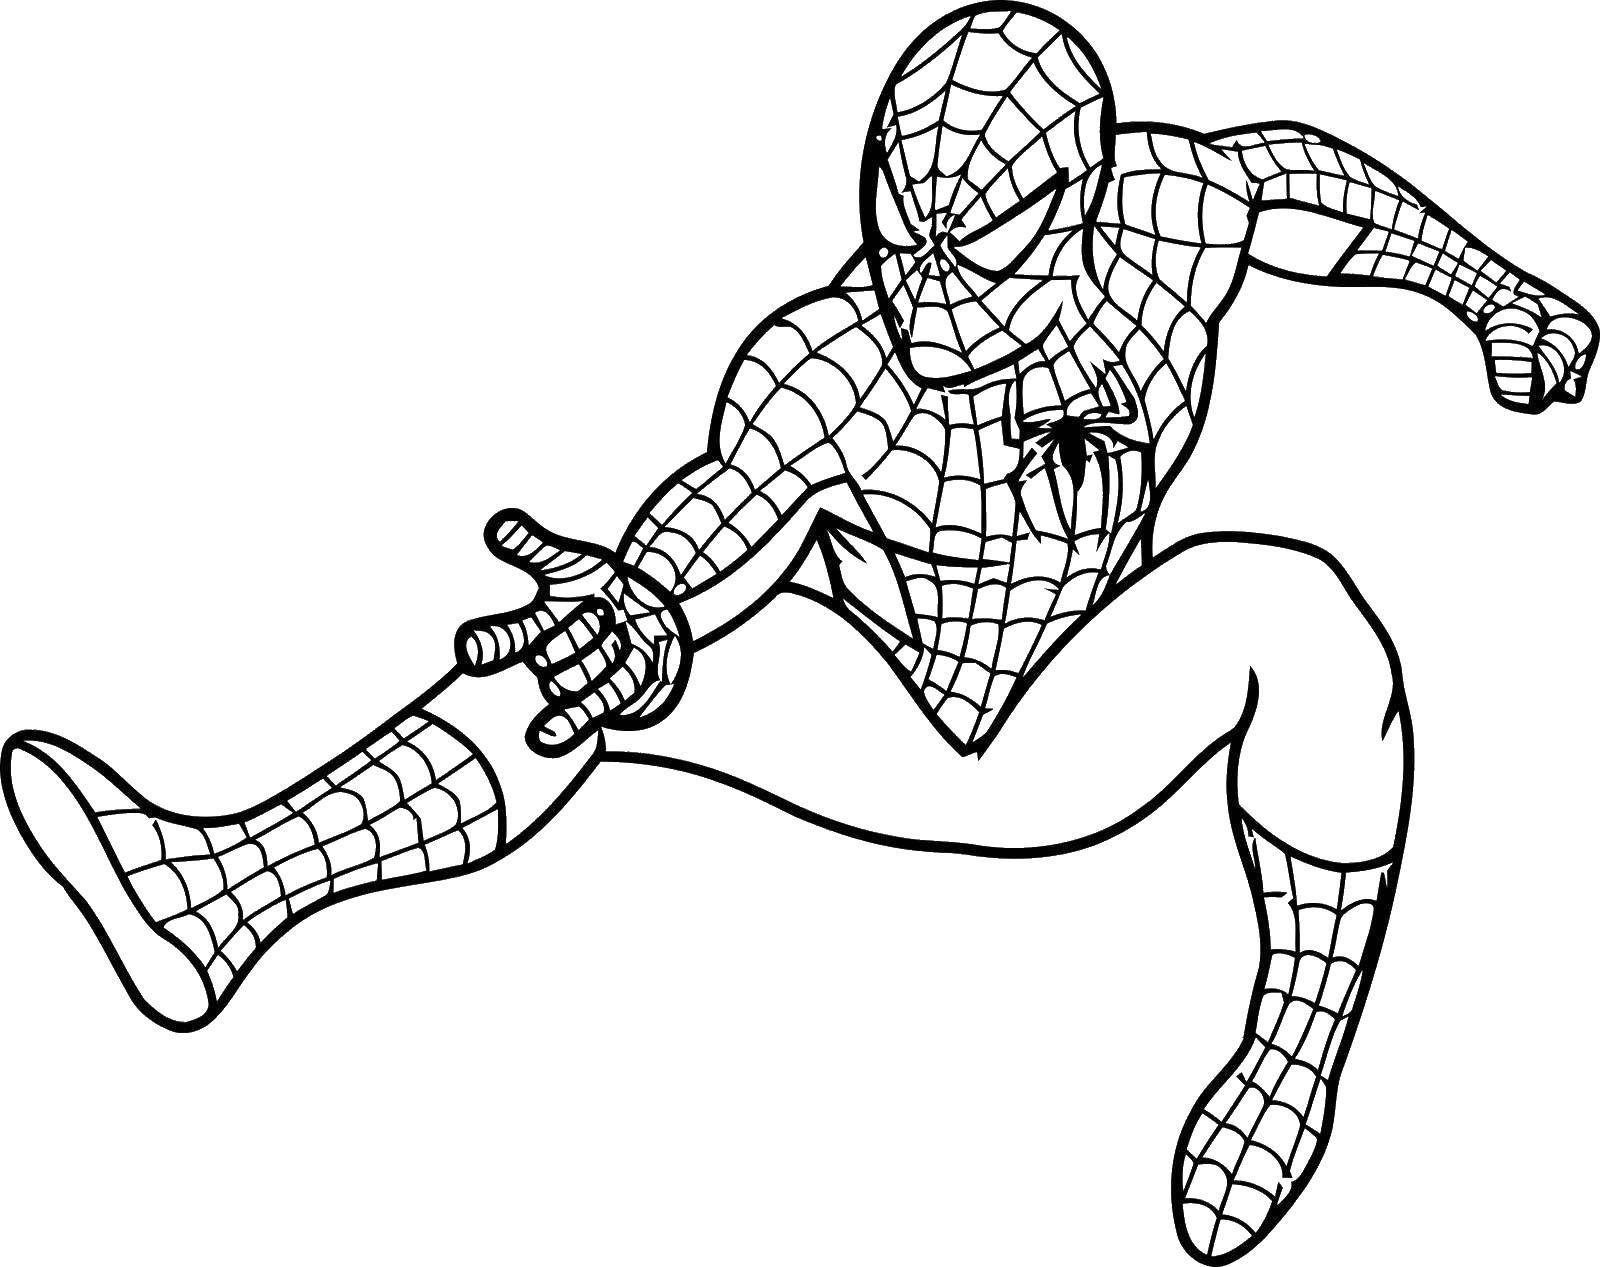 Coloring Spider-man. Category spider man. Tags:  spider man, Spiderman.